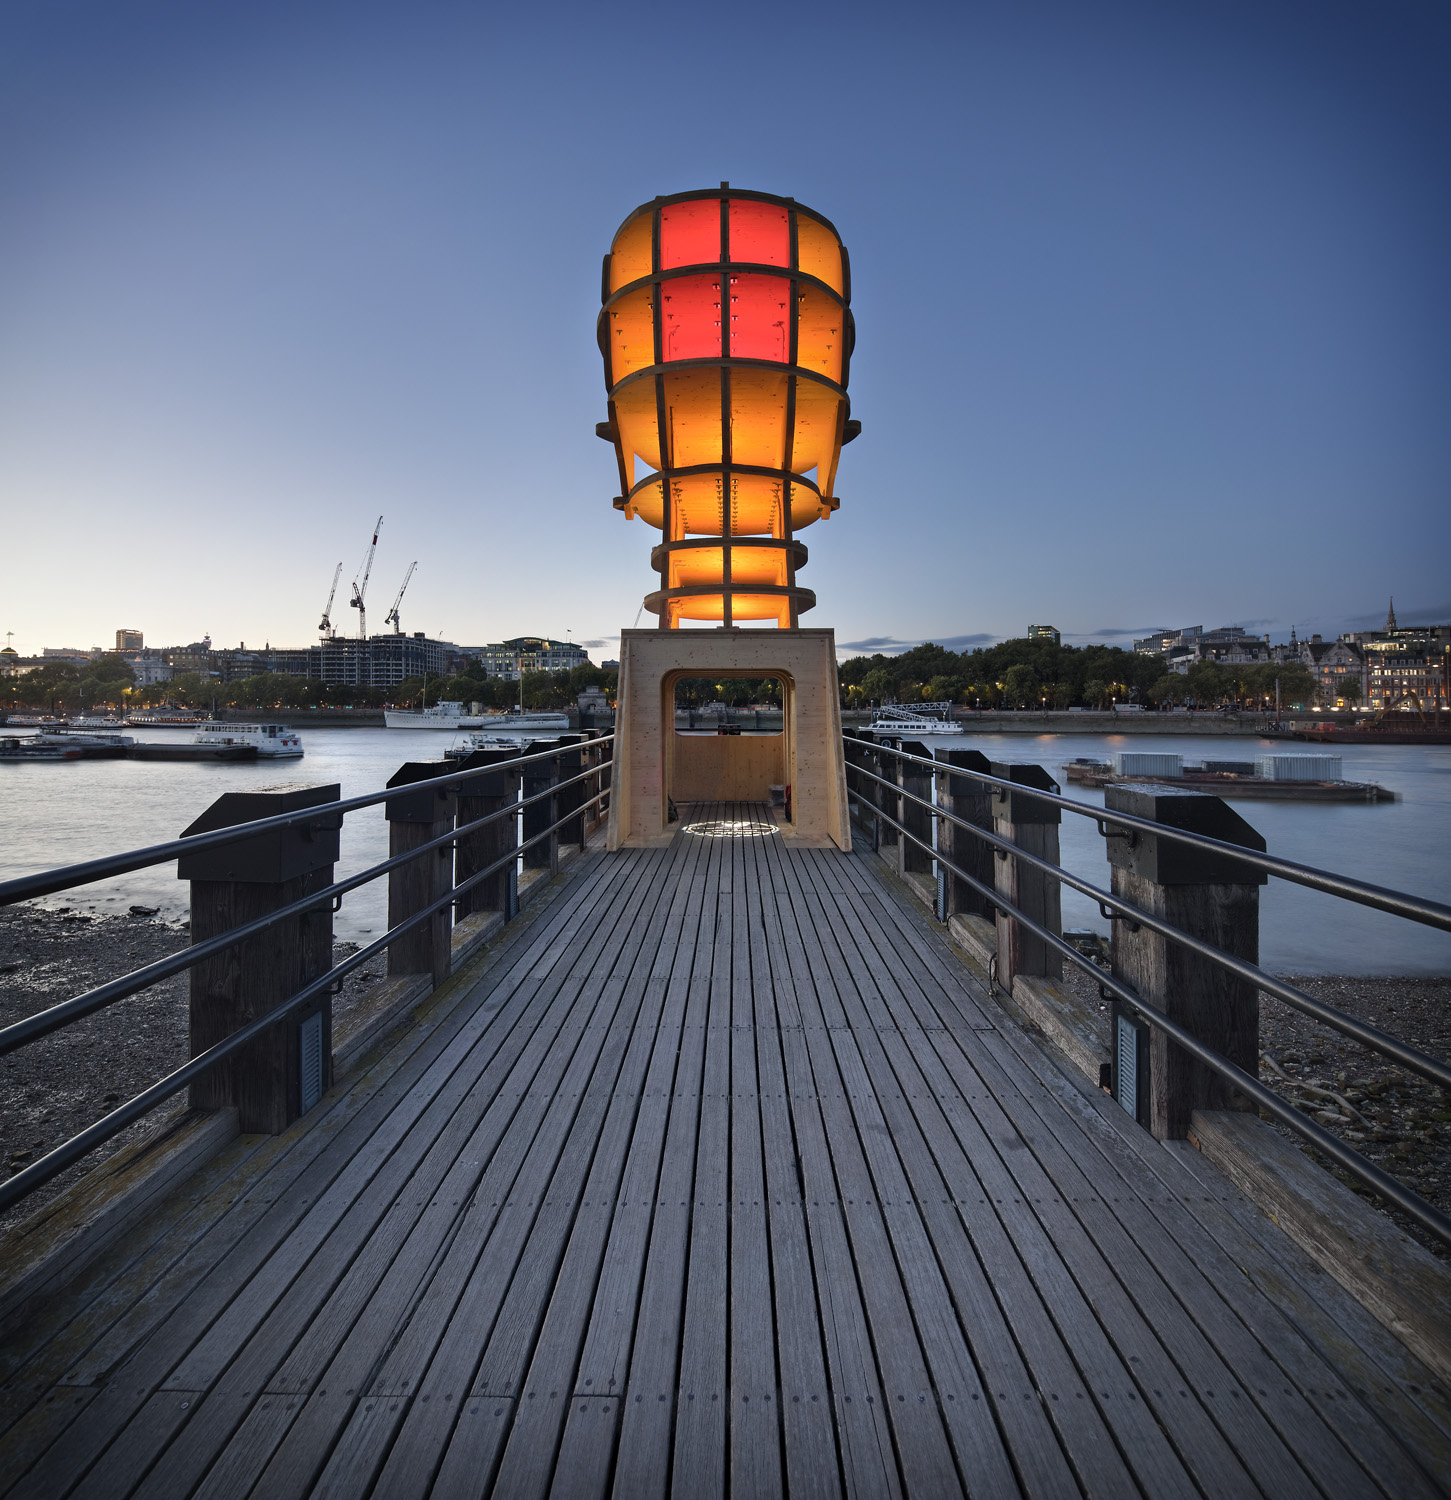  Light sculpture, "Head Above Water" by Steuart Padwick on the Oxo Tower pier, South Bank, London. Interactive lighting installation by Hoare Lea Lighting. The sculpture supports Time to Change's campaign to remove the stigma of mental illness. 